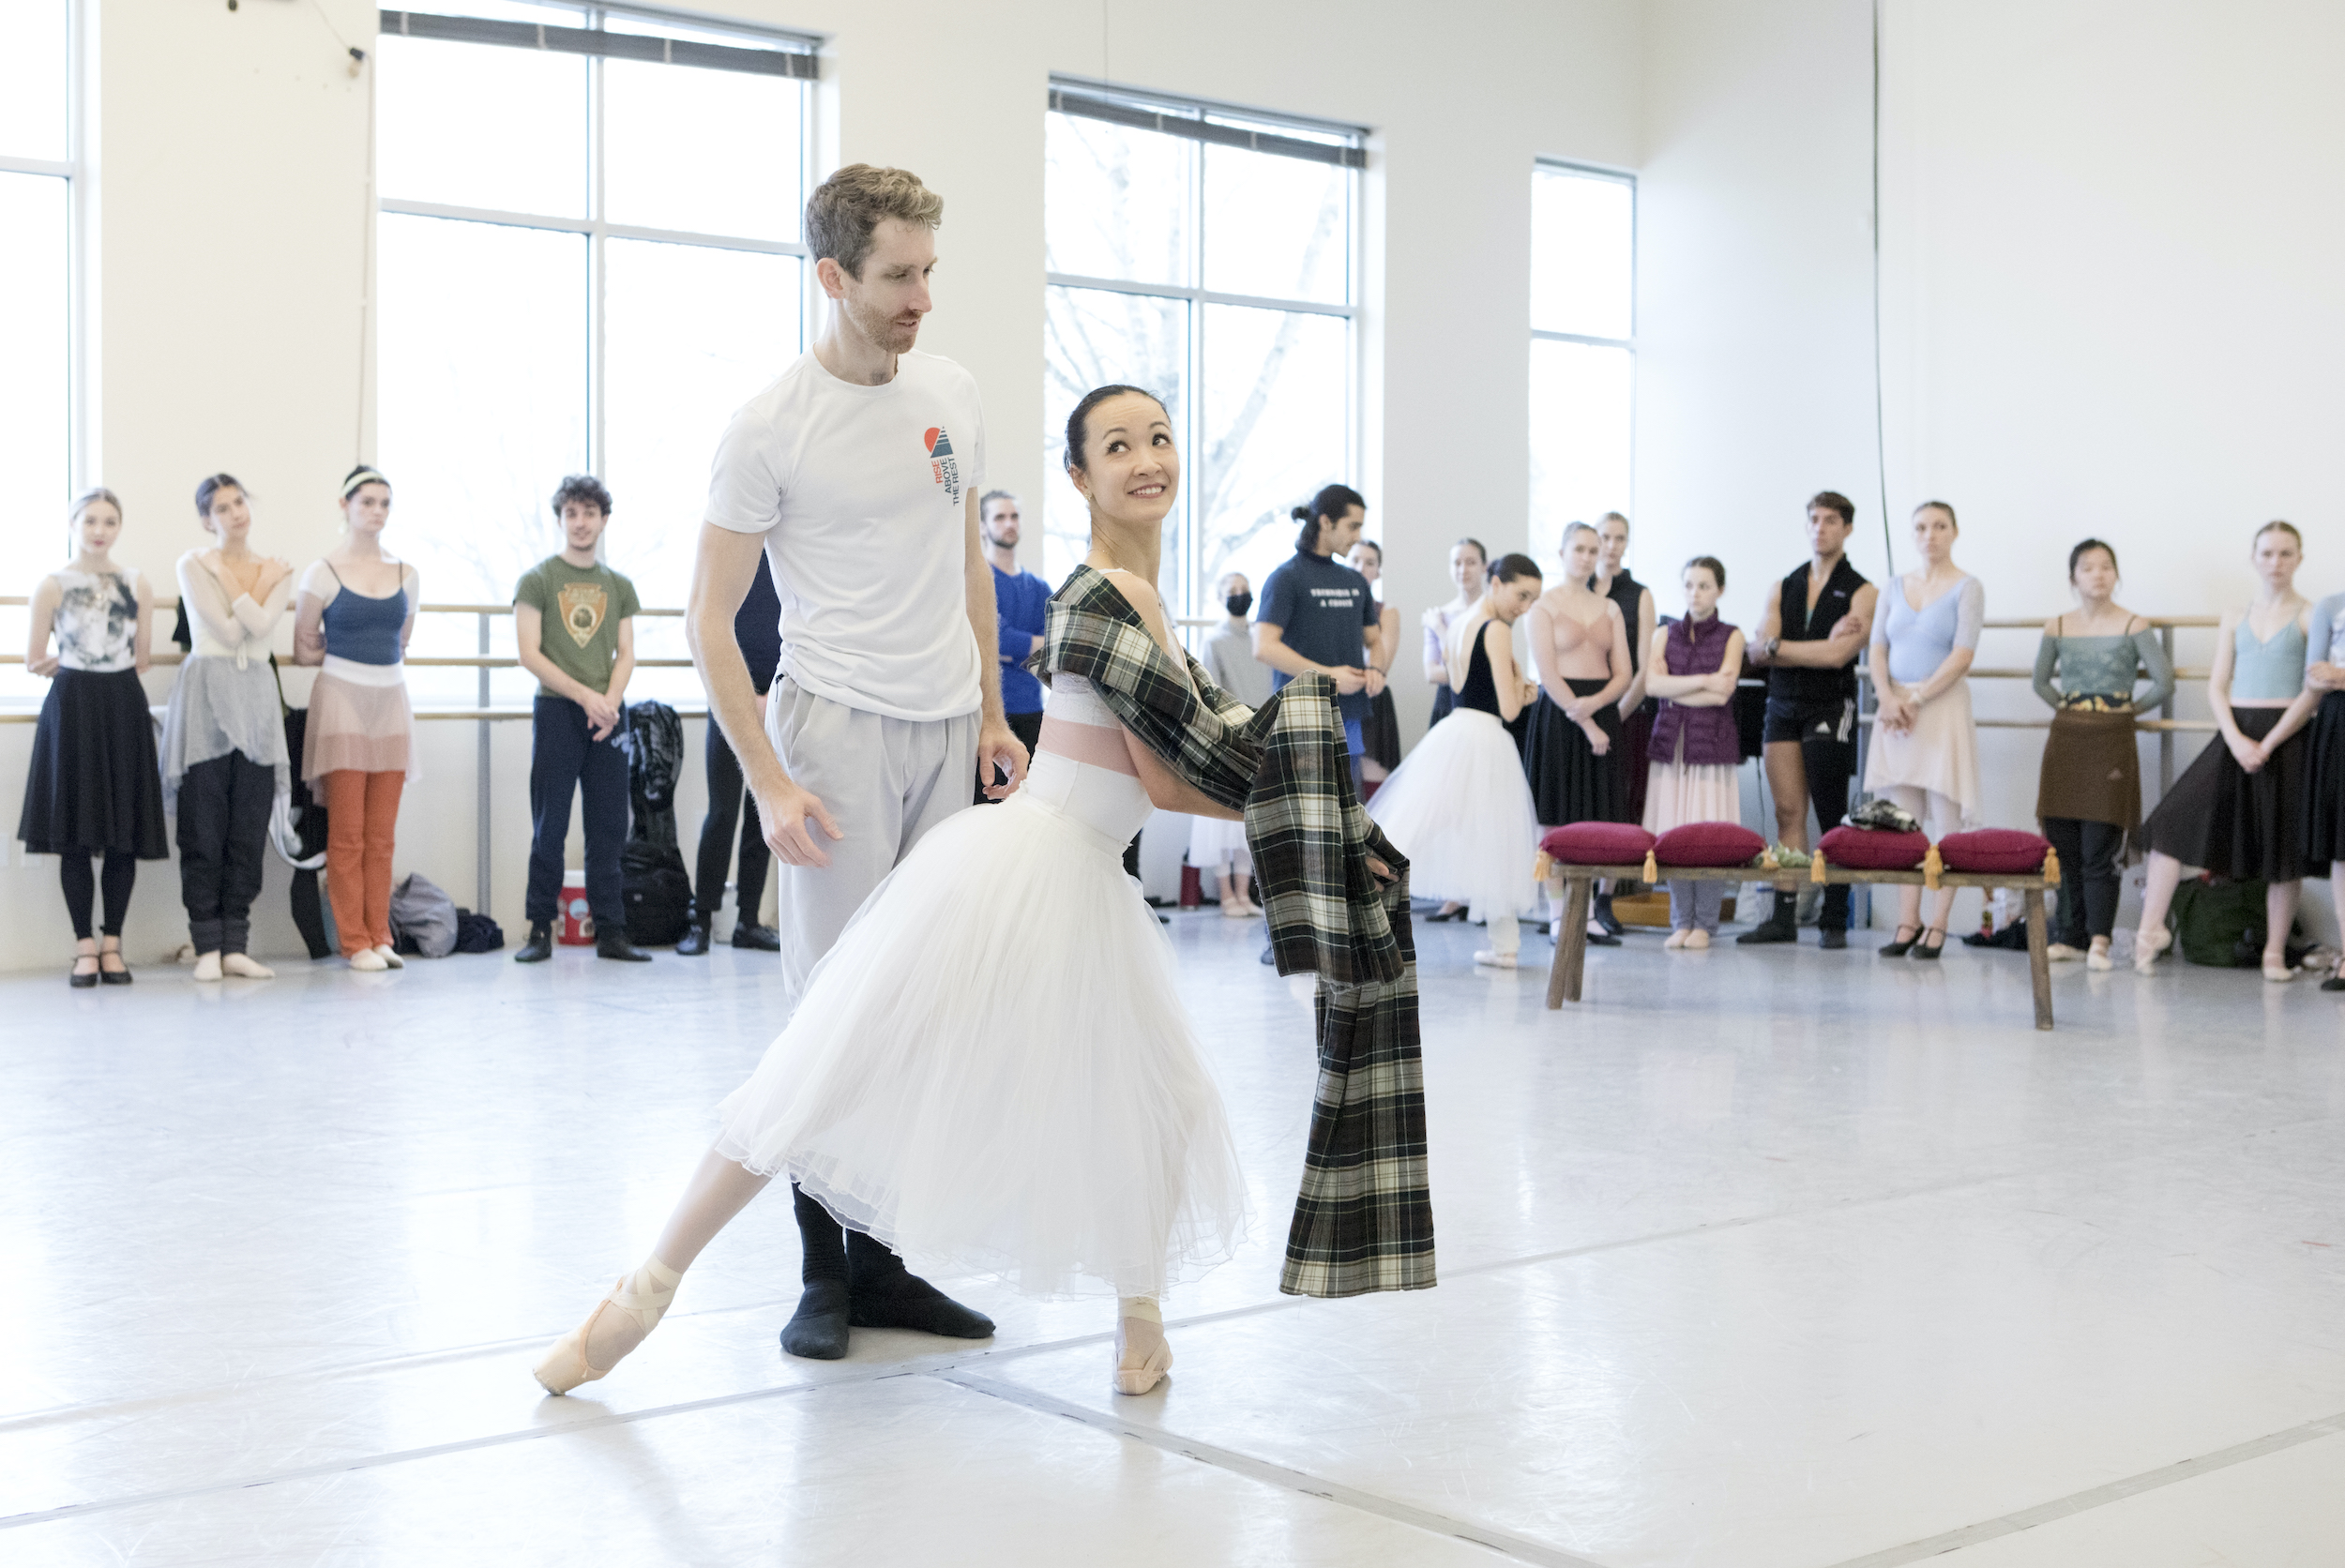 Xuan Cheng and Bria Simcoe rehearse a scene from the ballet La Sylphide in a large dance studio with large windows. Cheng, in a long white tutu, lunges in front of Simcoe with her right foot in tendu derriere and wraps a plaid tartan shawl around her shoulders. She looks over her right shoulder and up at Simcoe coyly as he stands behind her. He wears a white T-shirt, gray sweatpants and black socks and ballet slippers, and looks at Cheng intently. Towards the back of the studio, a large group of dancers in practice clothes stand and watch them rehearse.